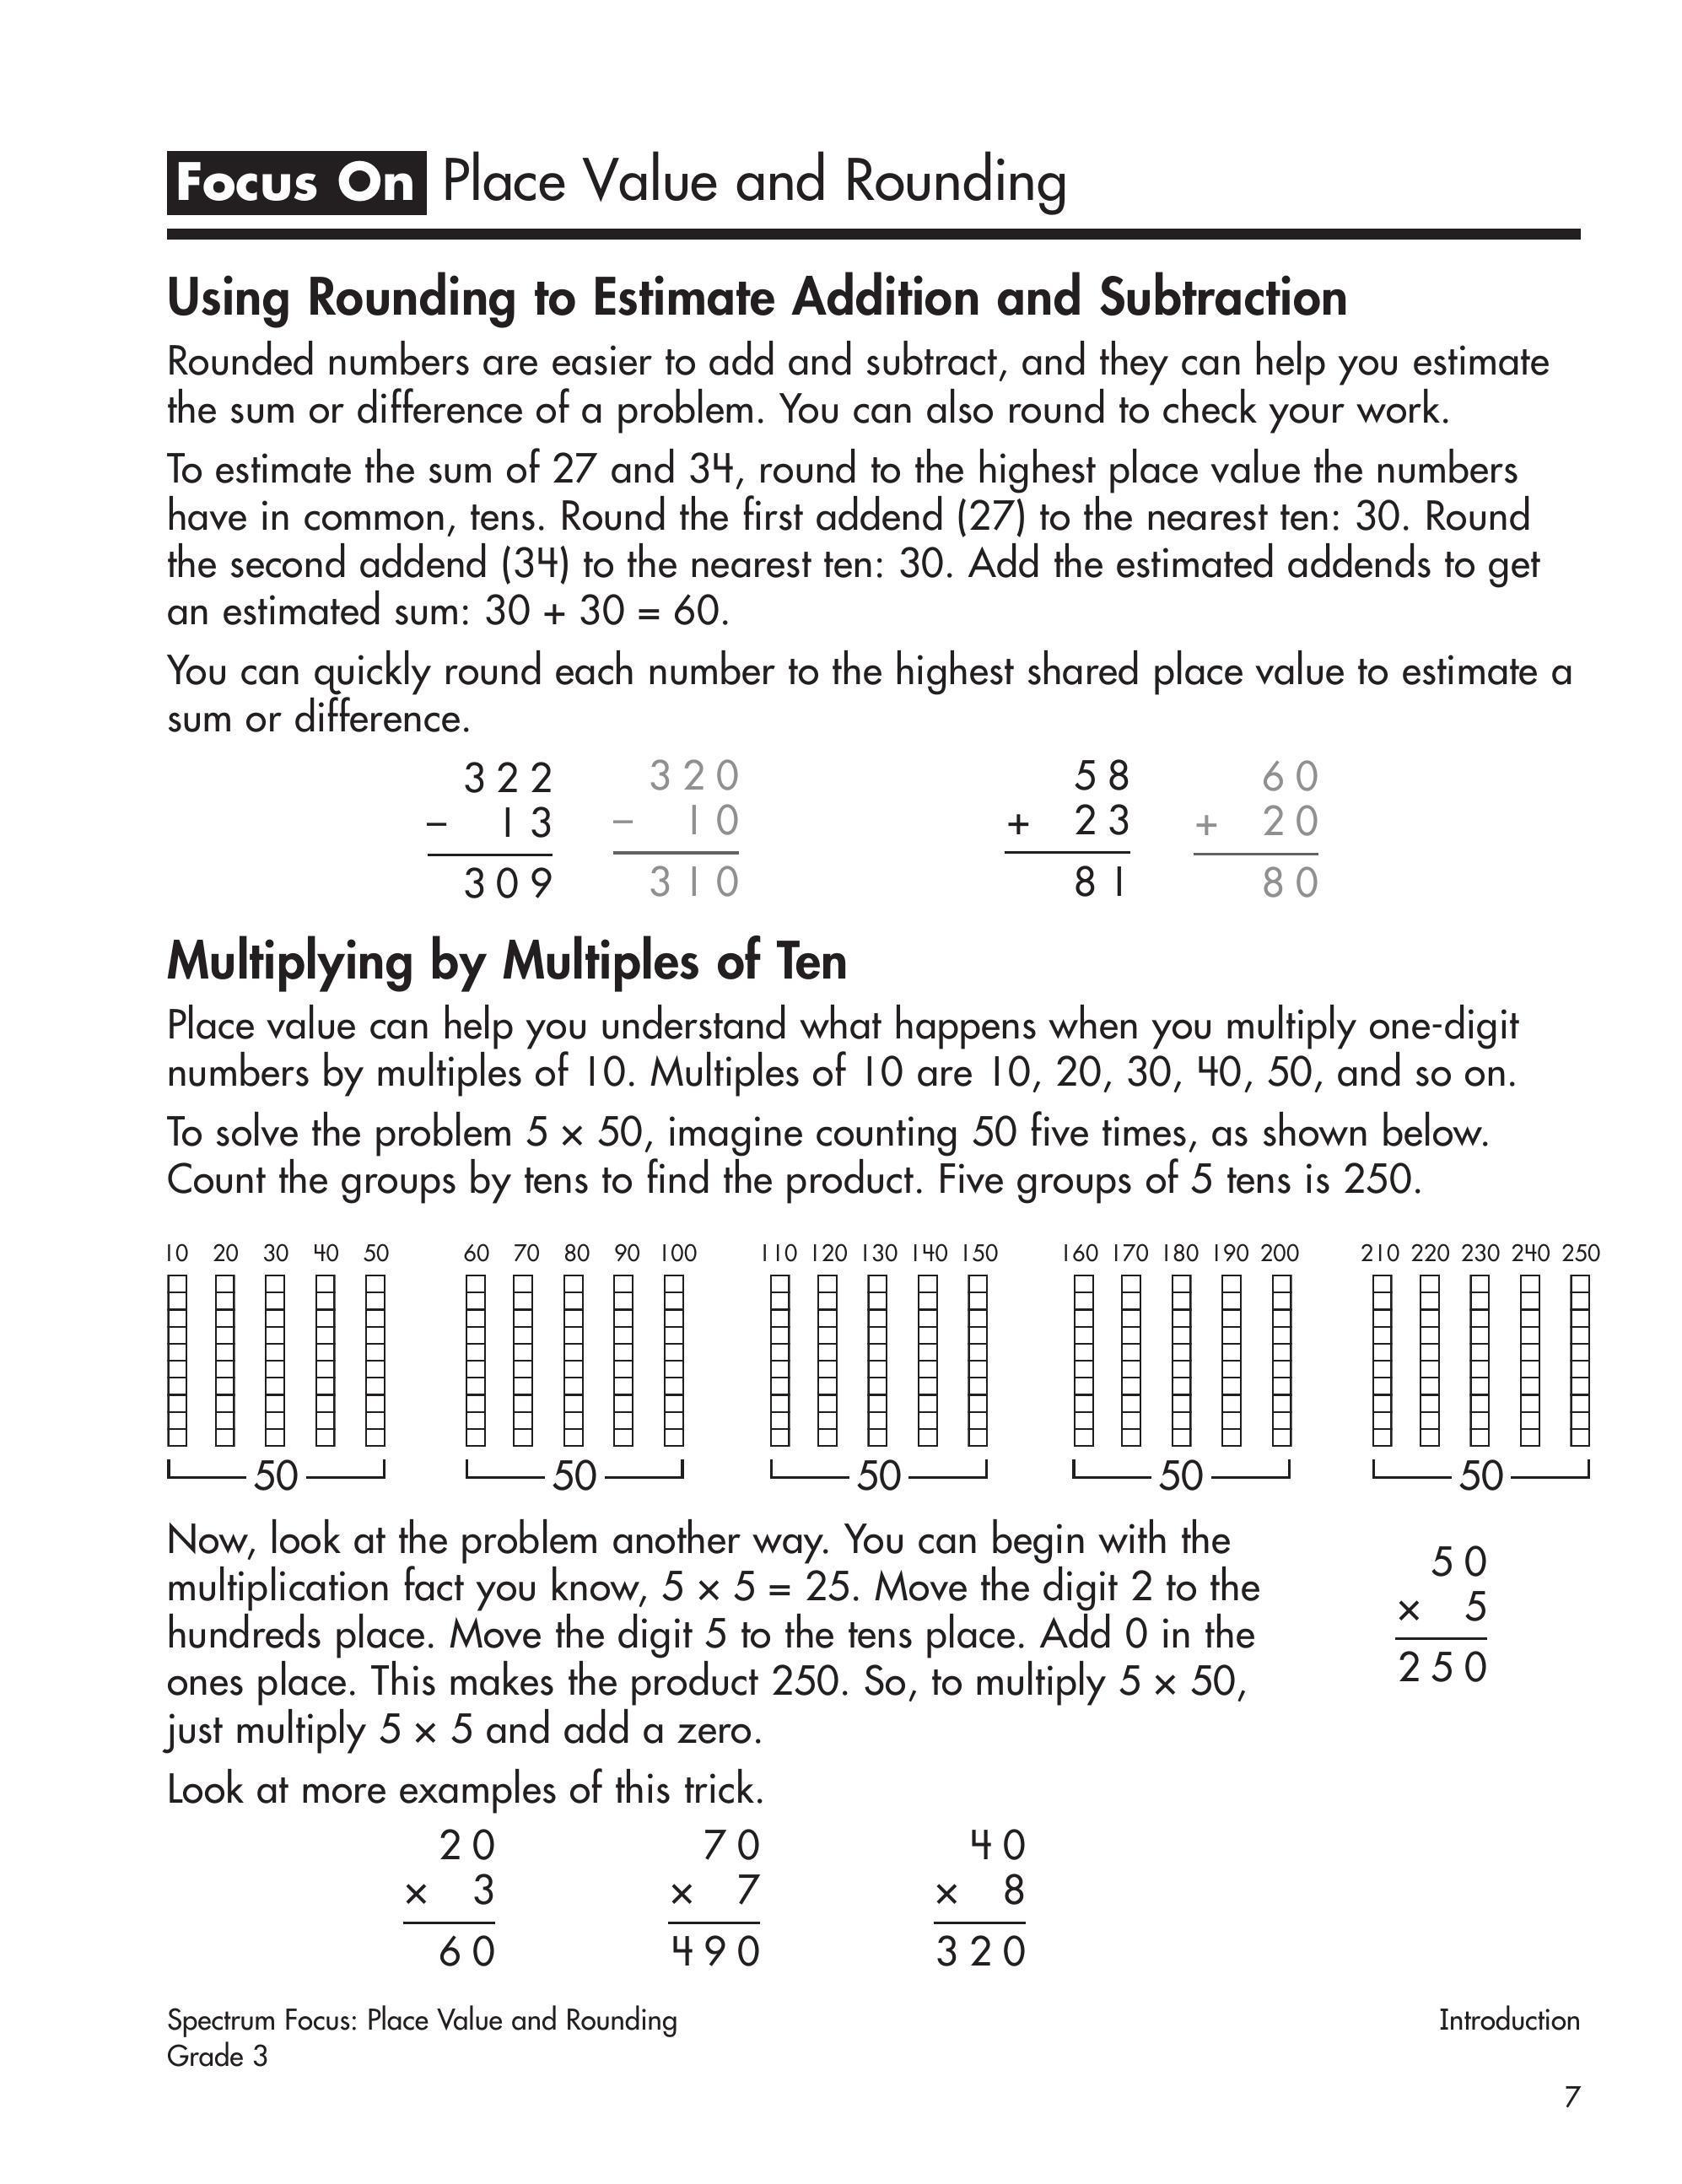 Place Value And Rounding 3 (7)